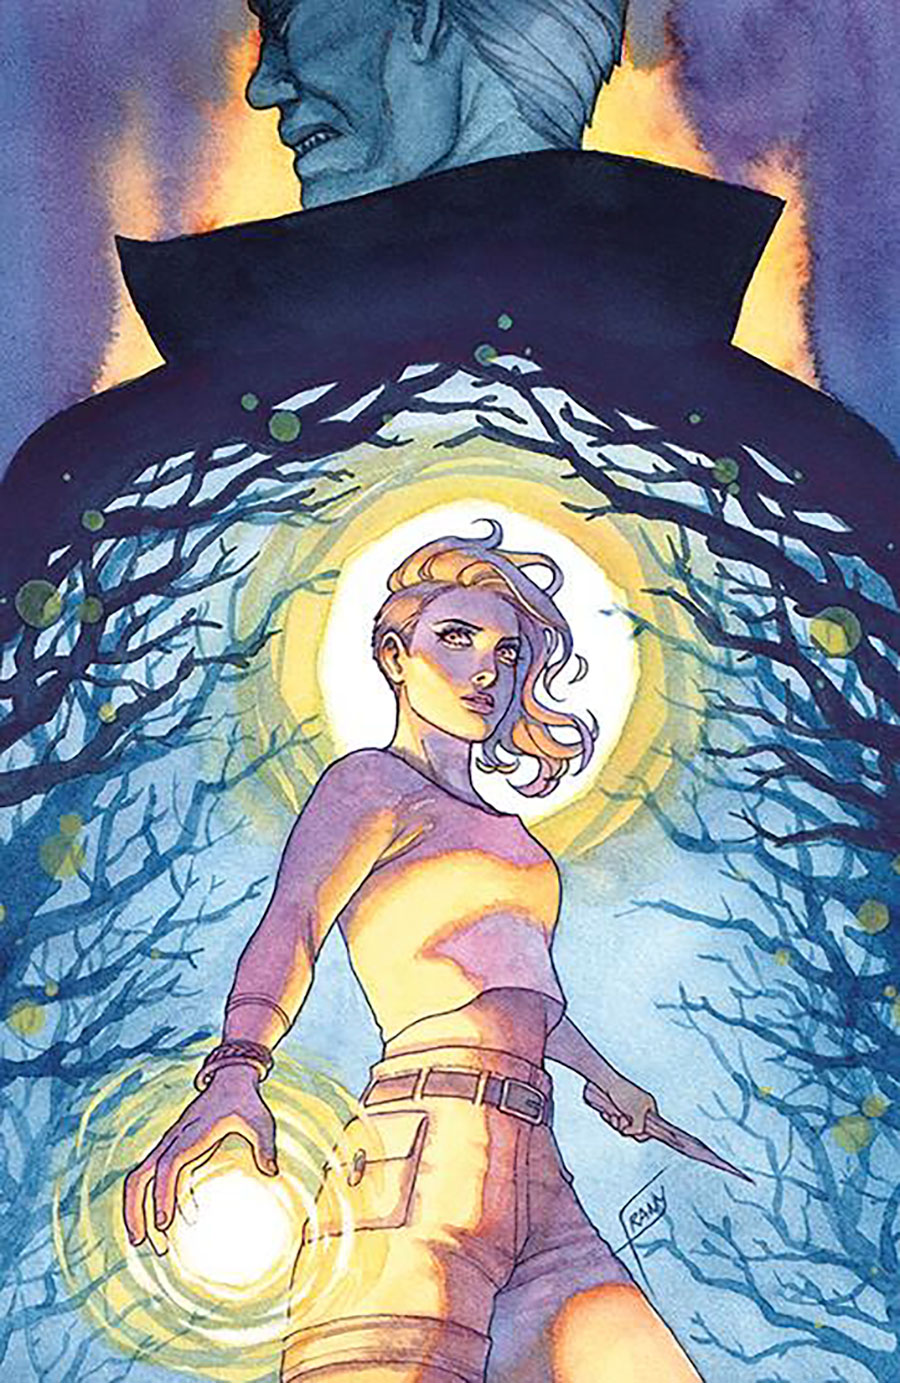 Buffy The Last Vampire Slayer Vol 2 #3 Cover D Incentive Frany Virgin Variant Cover